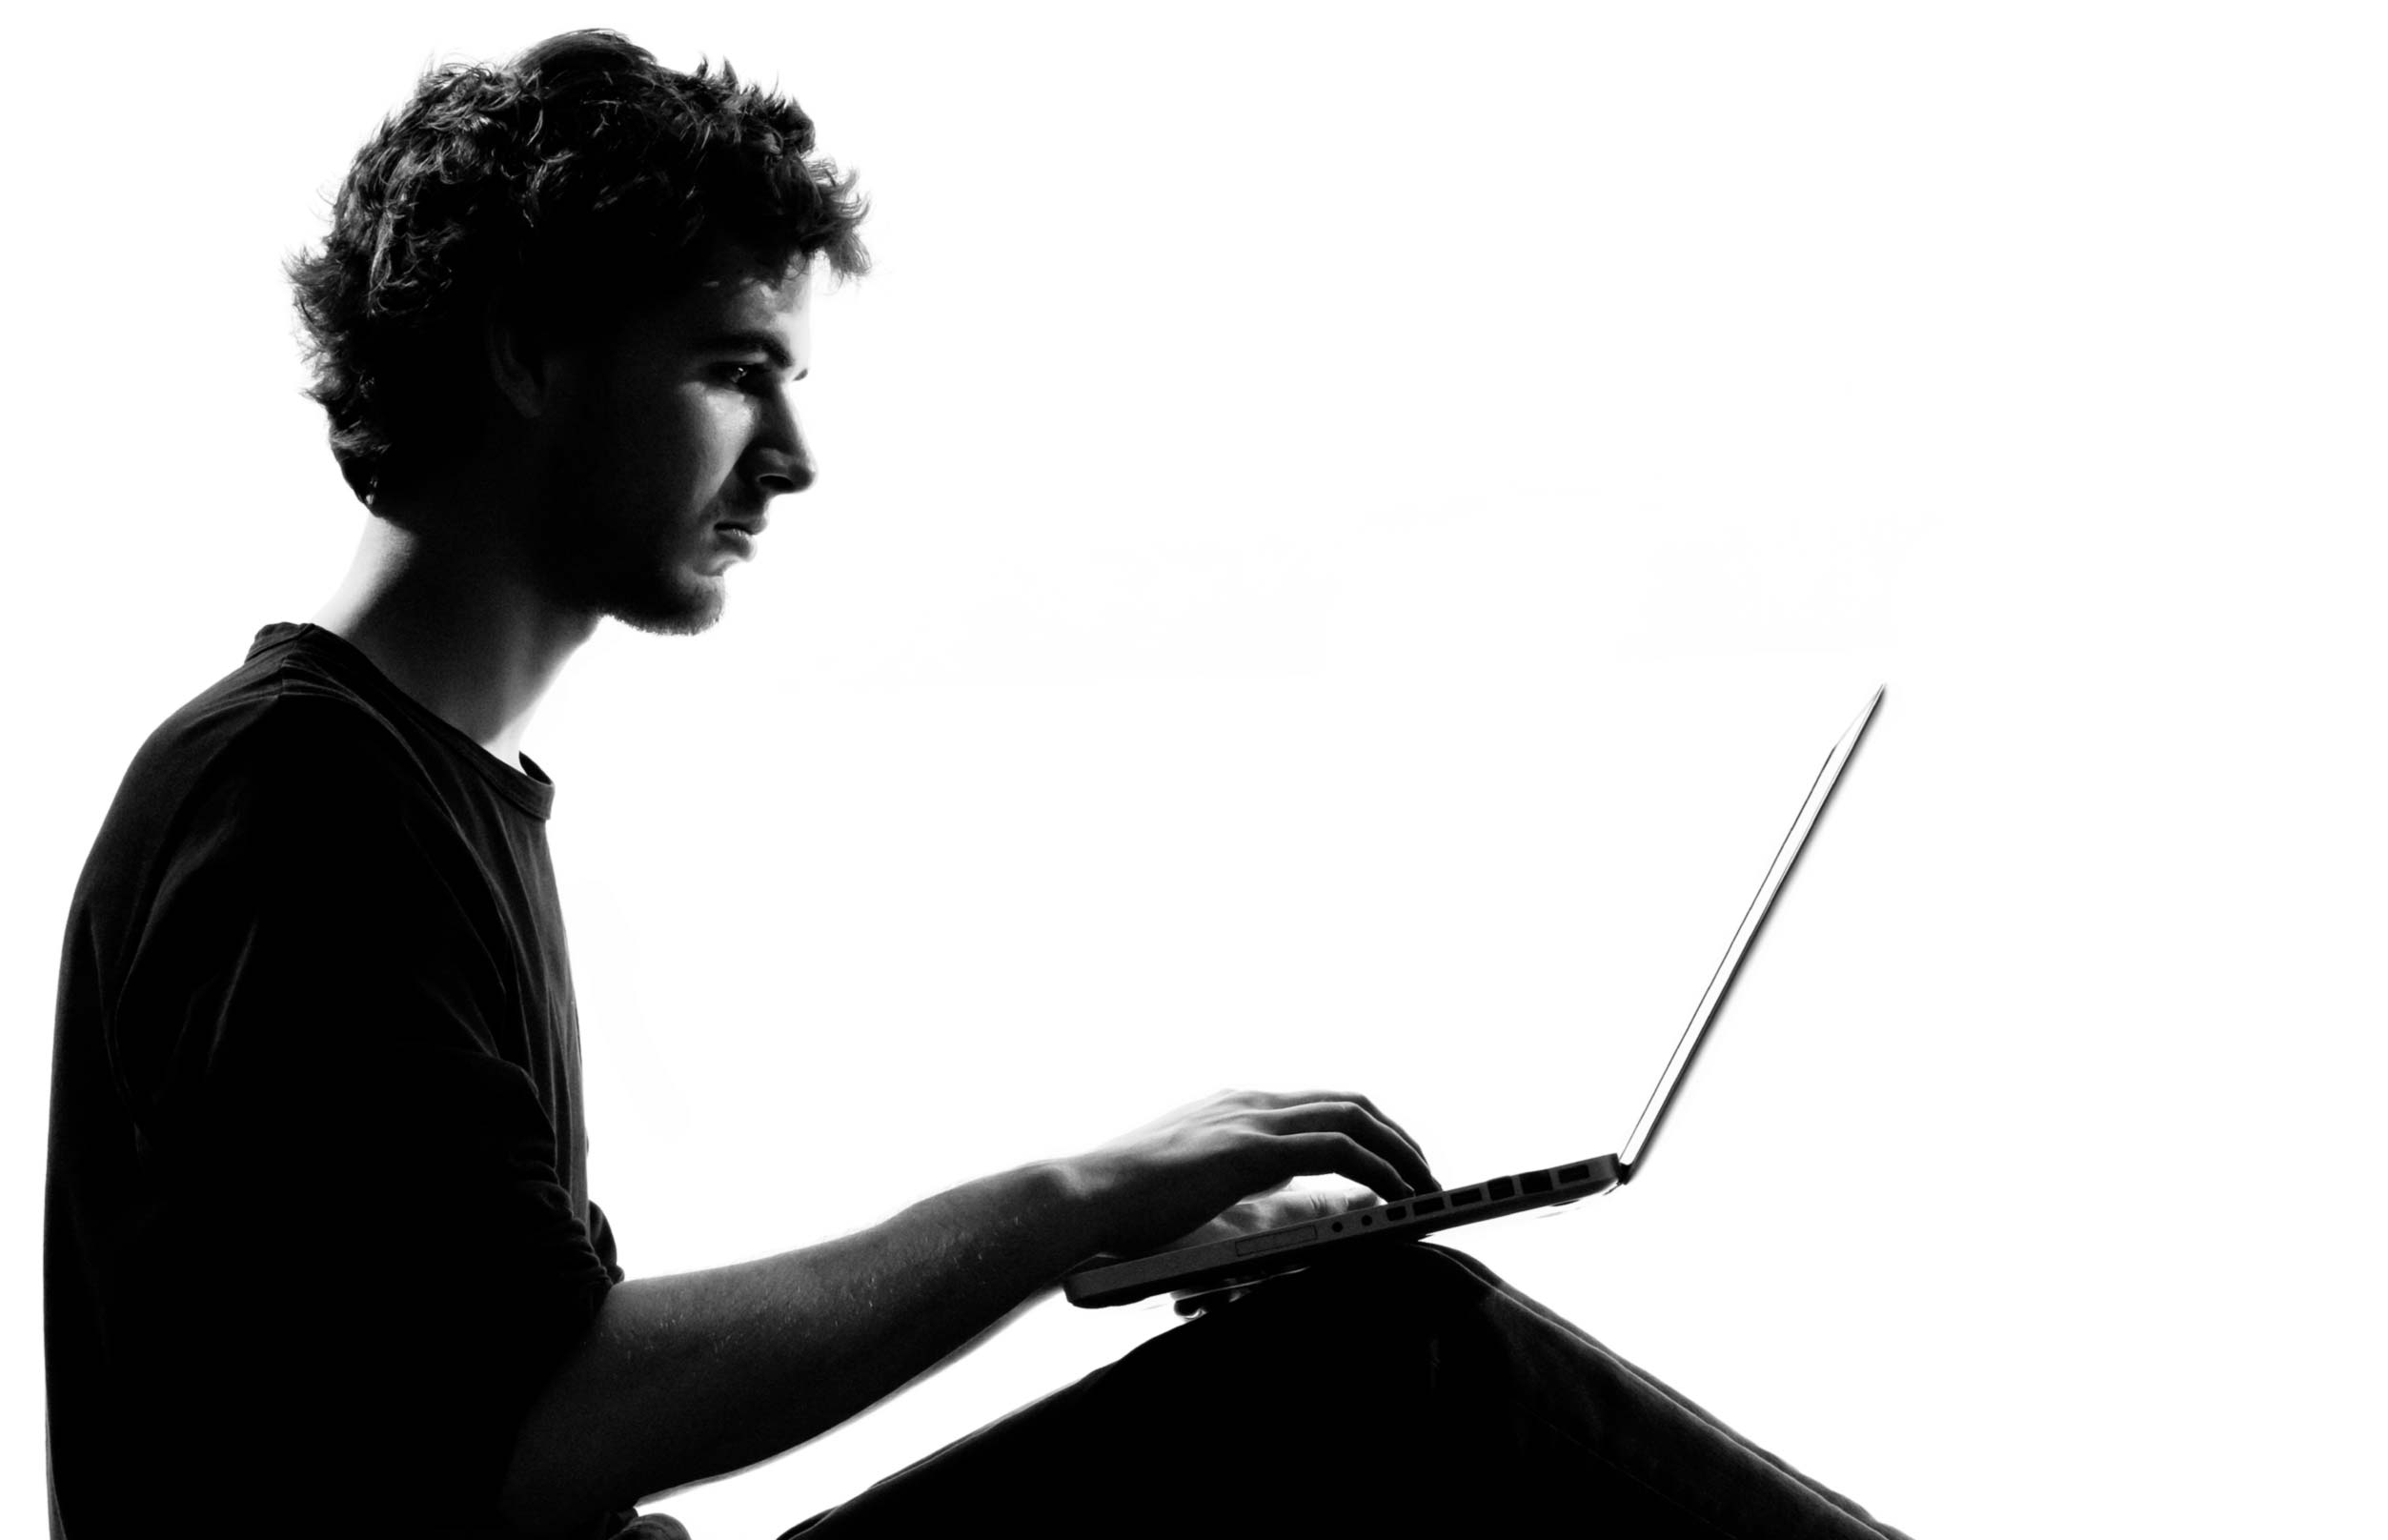 physiotherapy solutions - image of a man reasurching on laptop